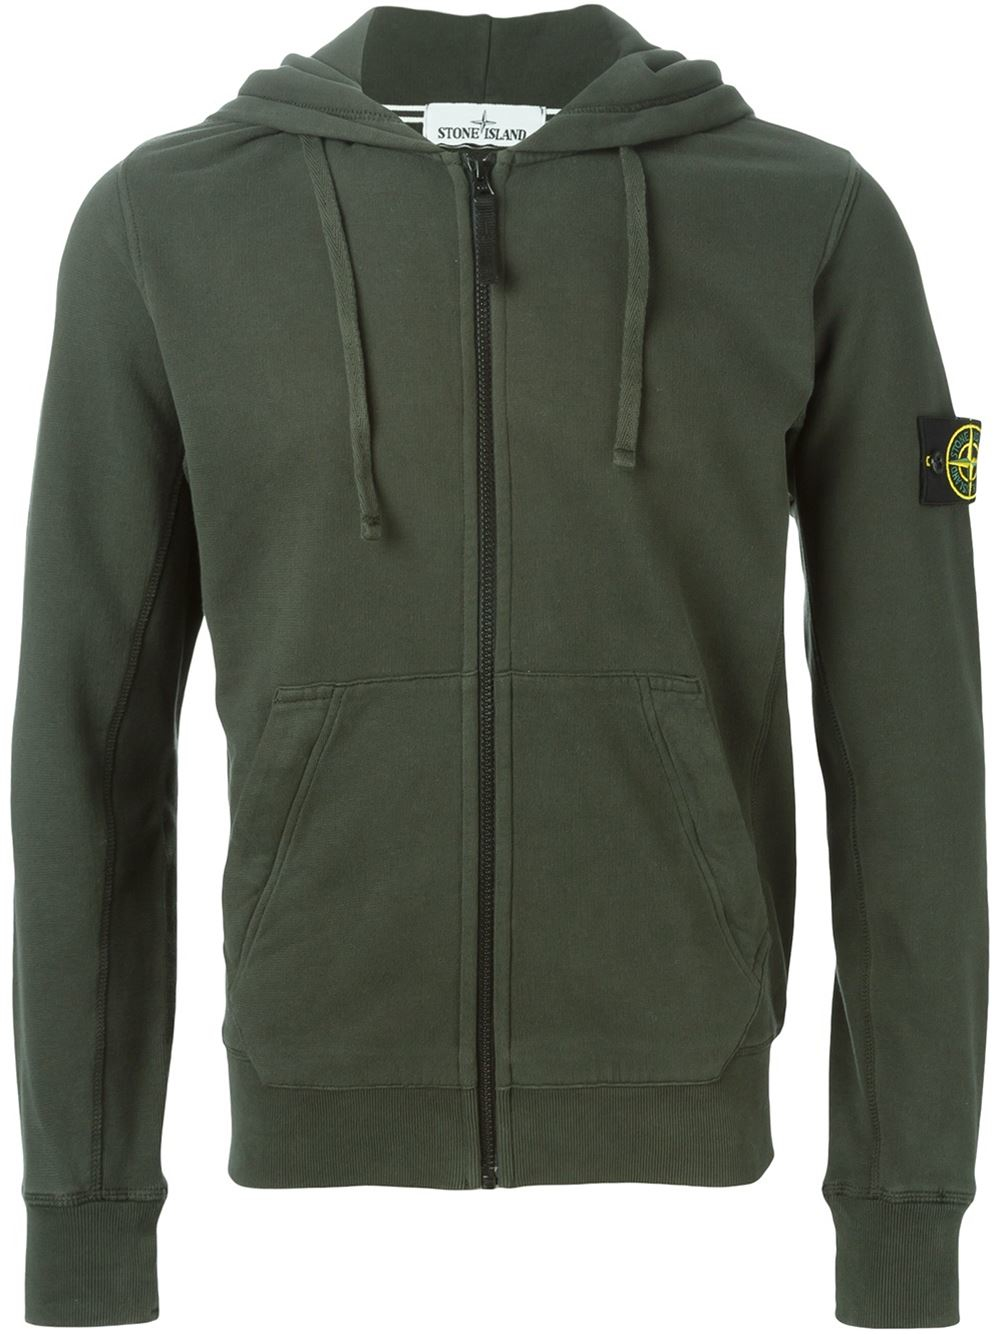 Lyst - Stone Island Zipped Hoodie in Green for Men